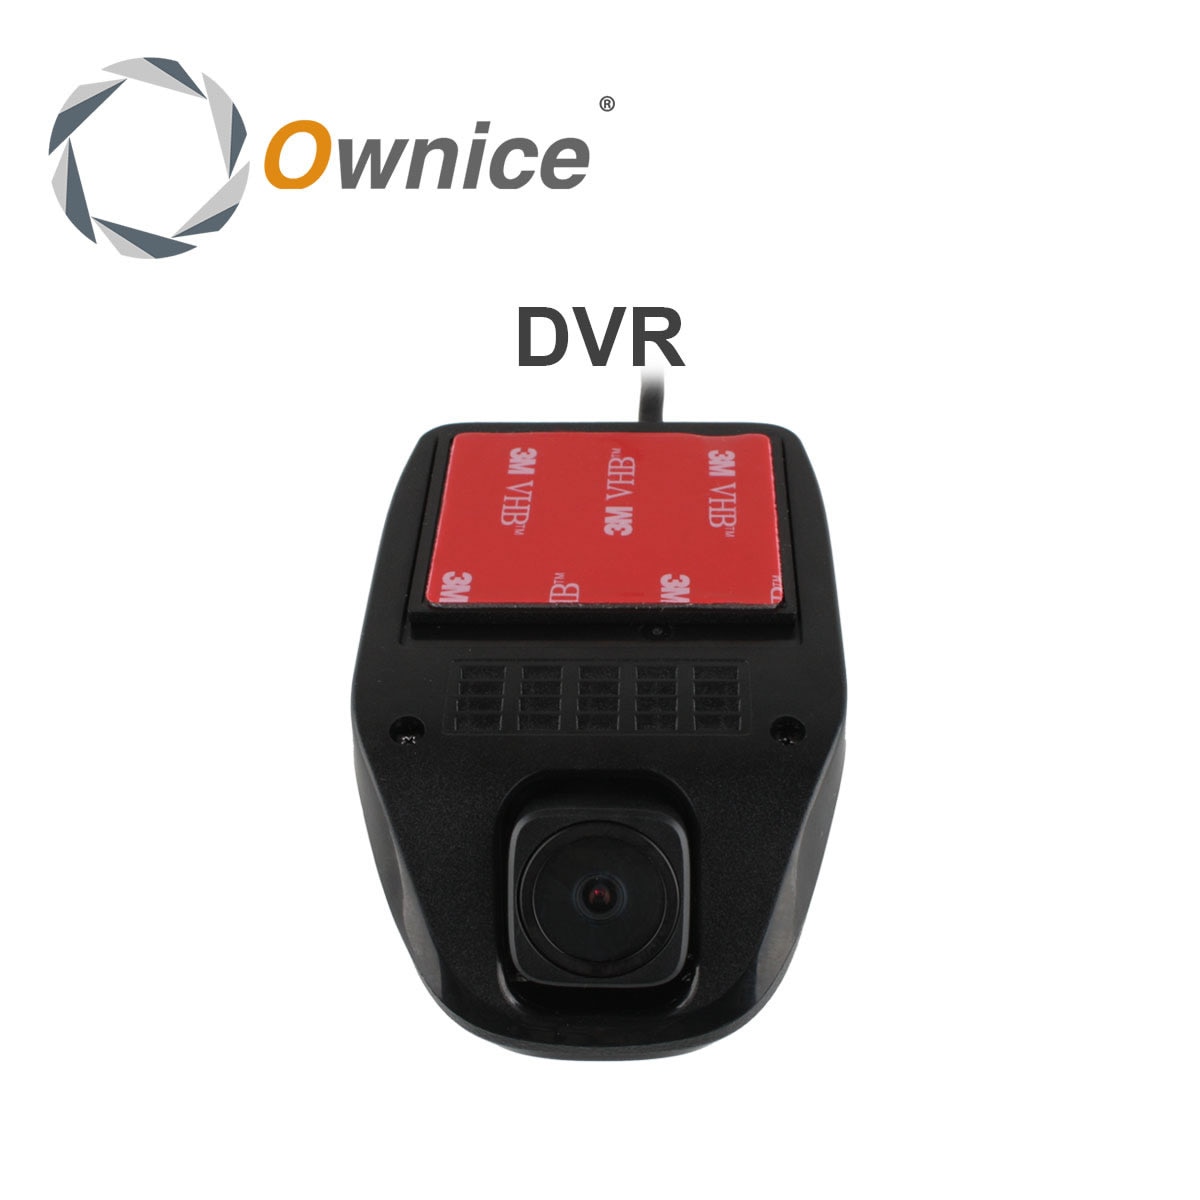 Special DVR without Battery For Ownice C500 Car DVD and the DVD manufacture date must after 10th of April, (included 10th).